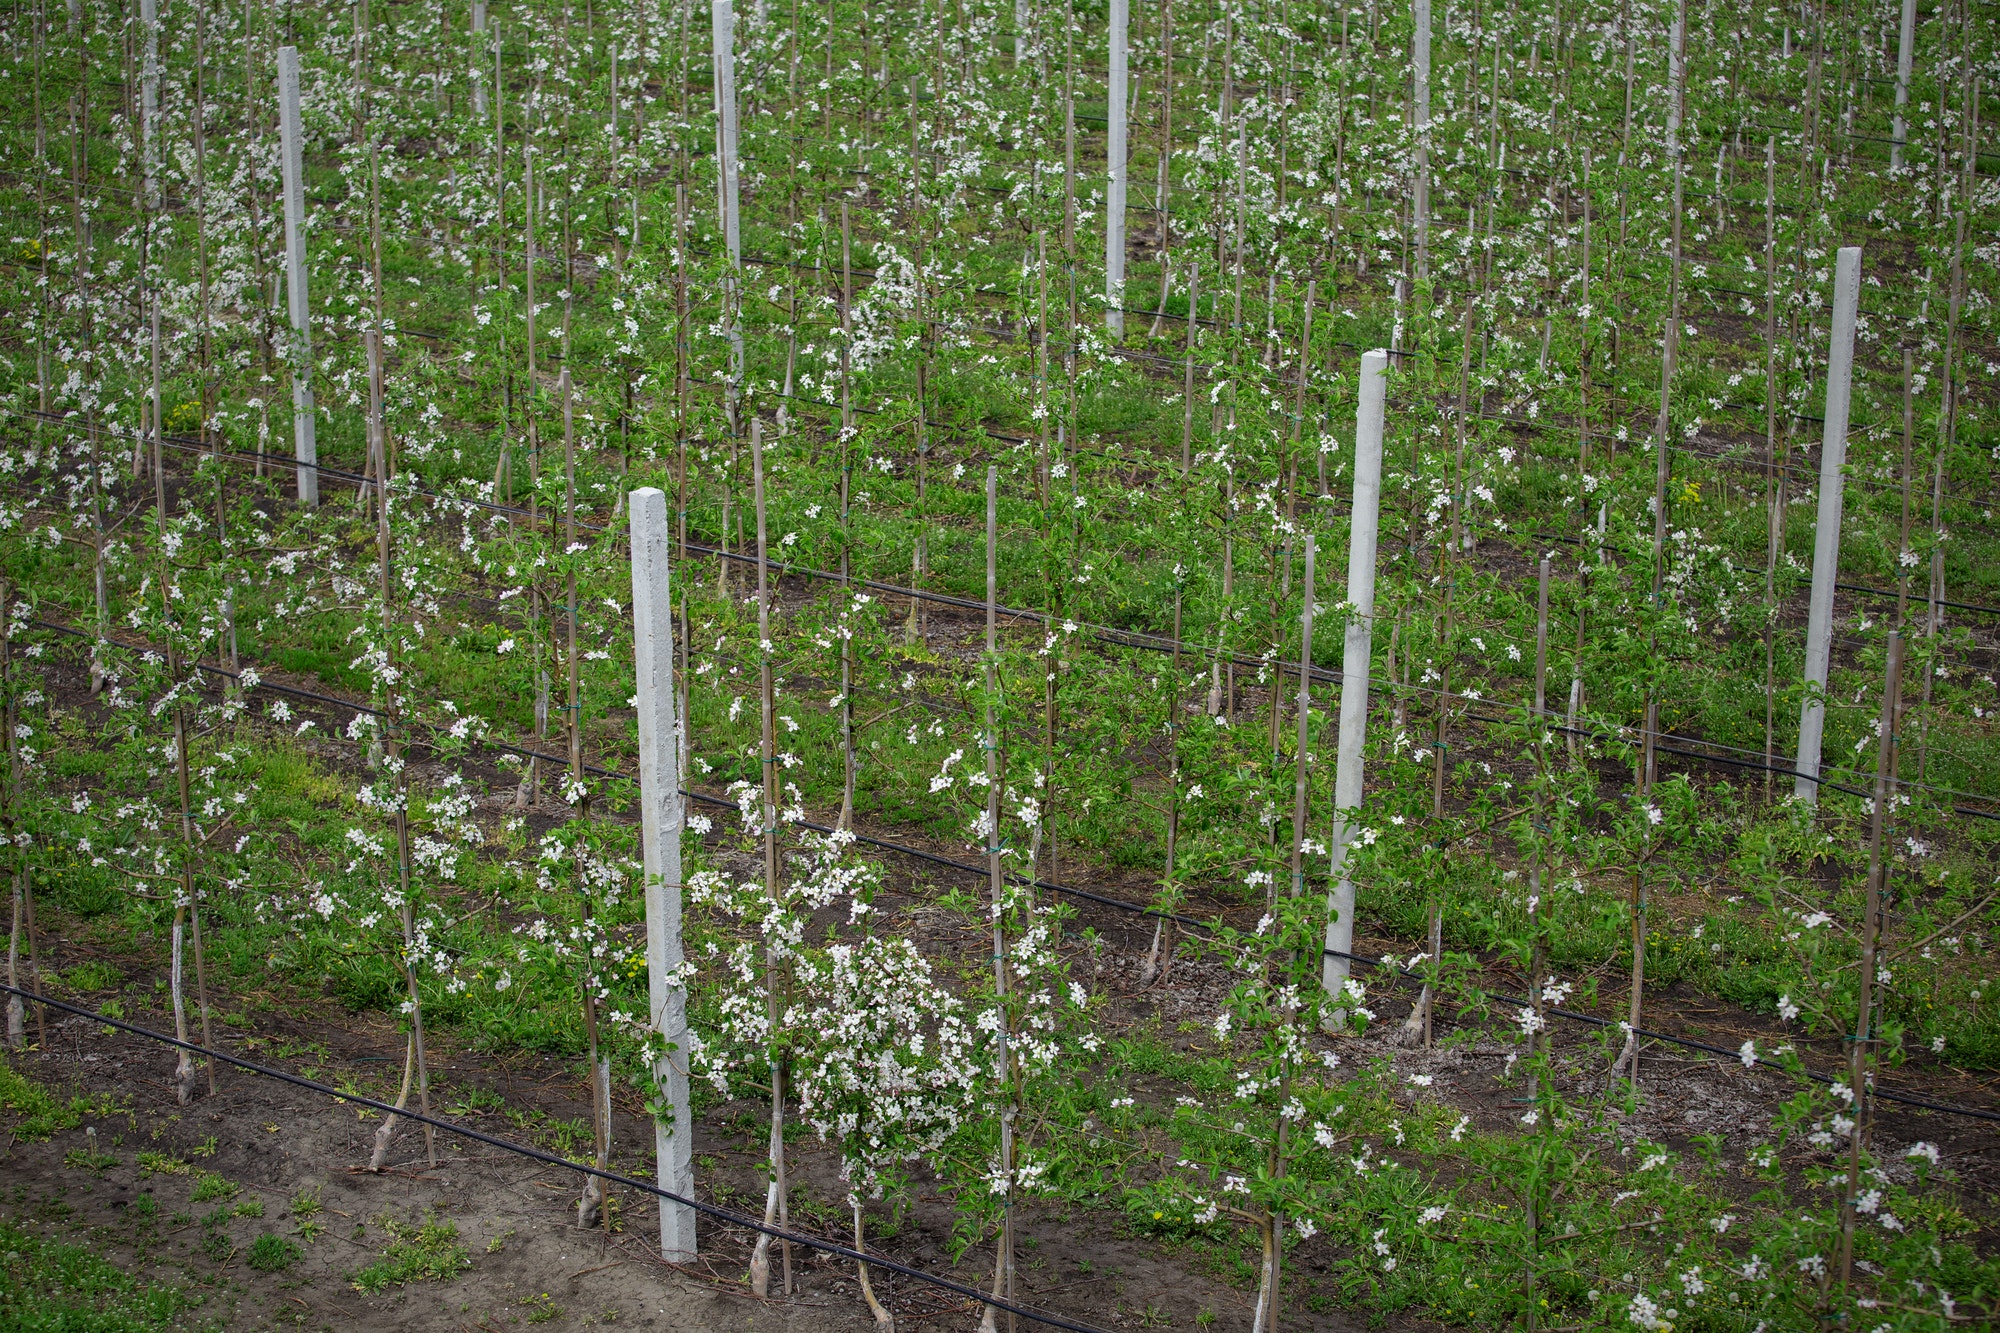 Blooming apple trees in spring in orchard. Bushes with flowers